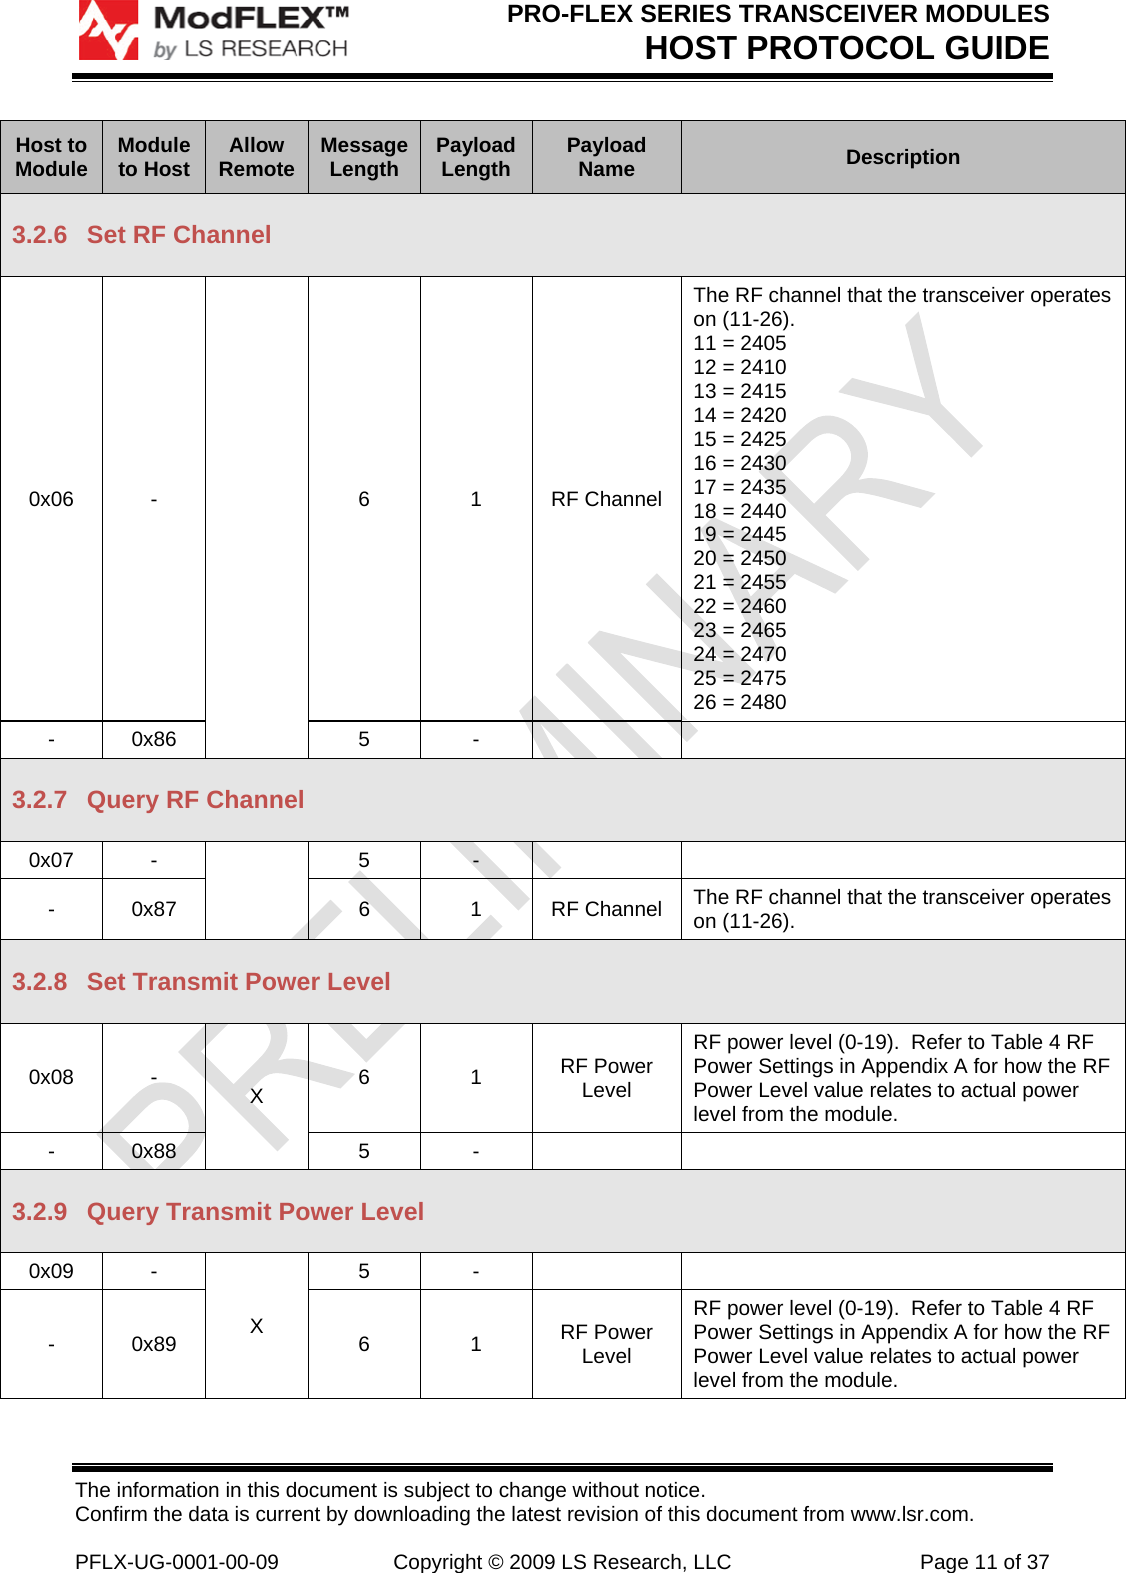 PRO-FLEX SERIES TRANSCEIVER MODULES HOST PROTOCOL GUIDE The information in this document is subject to change without notice. Confirm the data is current by downloading the latest revision of this document from www.lsr.com.  PFLX-UG-0001-00-09  Copyright © 2009 LS Research, LLC  Page 11 of 37 Host to Module  Module to Host  Allow Remote  Message Length  Payload Length  Payload Name  Description 3.2.6  Set RF Channel 0x06 -   6 1 RF Channel The RF channel that the transceiver operates on (11-26). 11 = 2405 12 = 2410 13 = 2415 14 = 2420 15 = 2425 16 = 2430 17 = 2435 18 = 2440 19 = 2445 20 = 2450 21 = 2455 22 = 2460 23 = 2465 24 = 2470 25 = 2475 26 = 2480 - 0x86  5  -     3.2.7 Query RF Channel 0x07 -  5 -    - 0x87  6  1 RF Channel The RF channel that the transceiver operates on (11-26). 3.2.8  Set Transmit Power Level 0x08 -  X  6 1 RF Power Level RF power level (0-19).  Refer to Table 4 RF Power Settings in Appendix A for how the RF Power Level value relates to actual power level from the module. - 0x88  5  -     3.2.9  Query Transmit Power Level 0x09 - X 5 -    - 0x89  6  1 RF Power Level RF power level (0-19).  Refer to Table 4 RF Power Settings in Appendix A for how the RF Power Level value relates to actual power level from the module. 